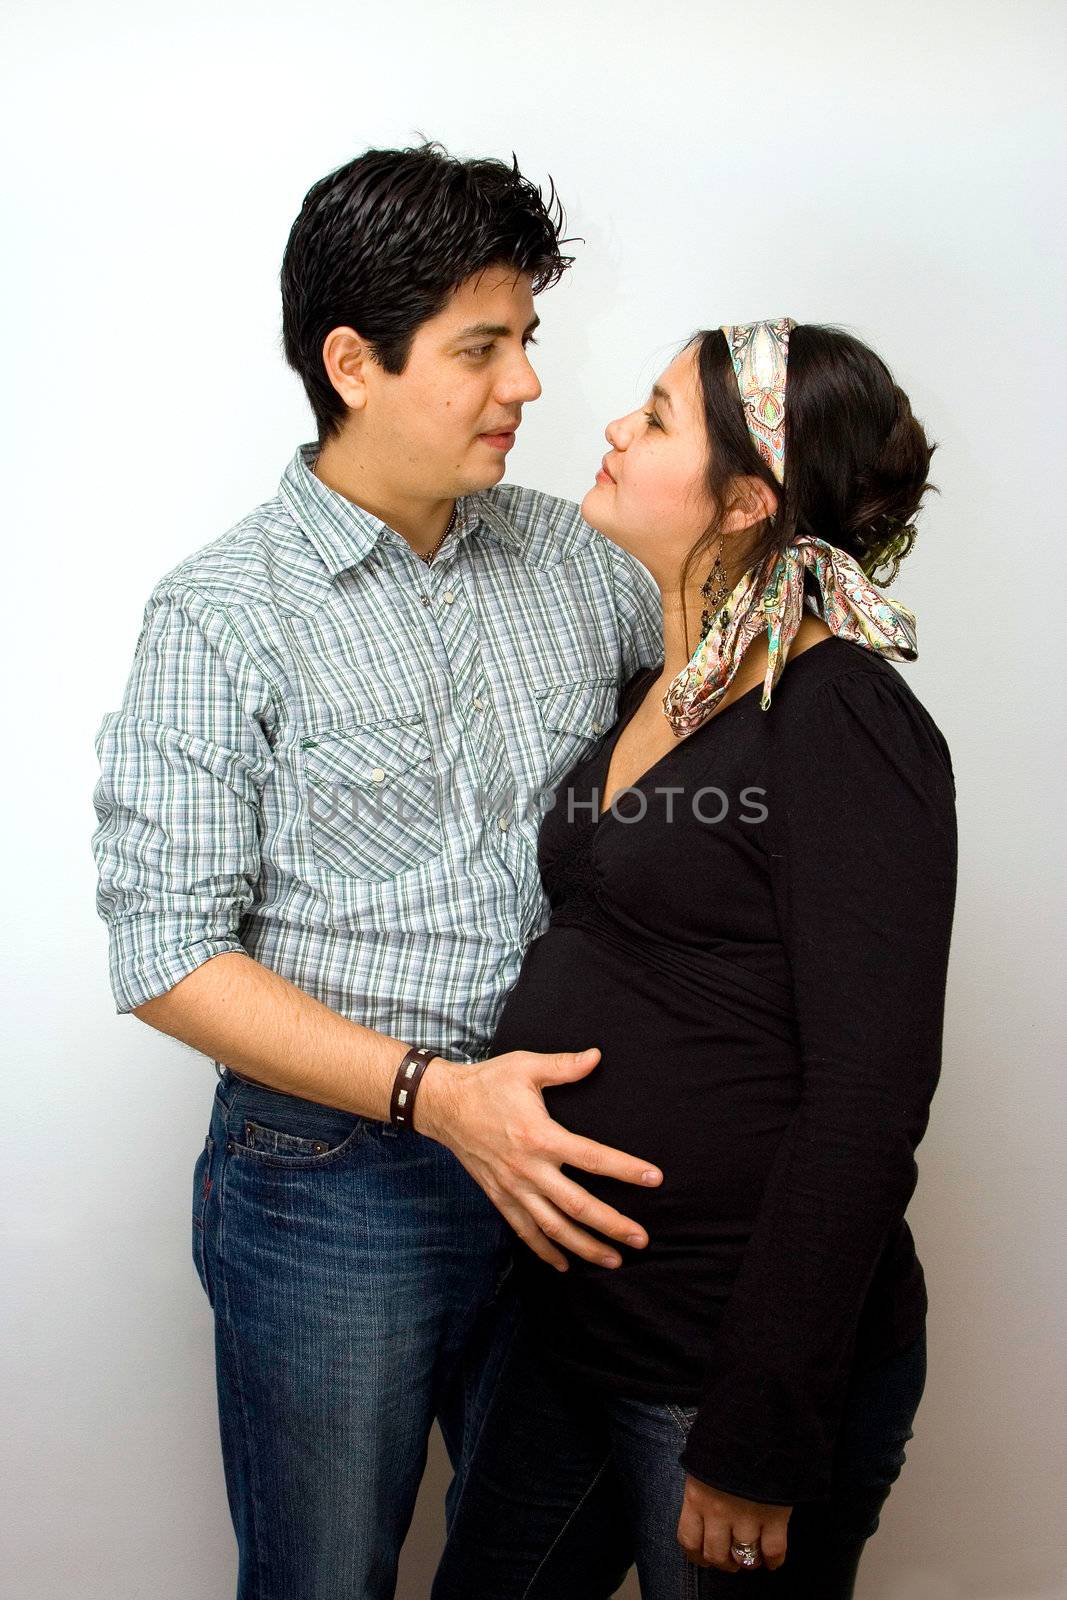 Parents expecting a baby. Father holds the belly of the mother, while parents face each other.